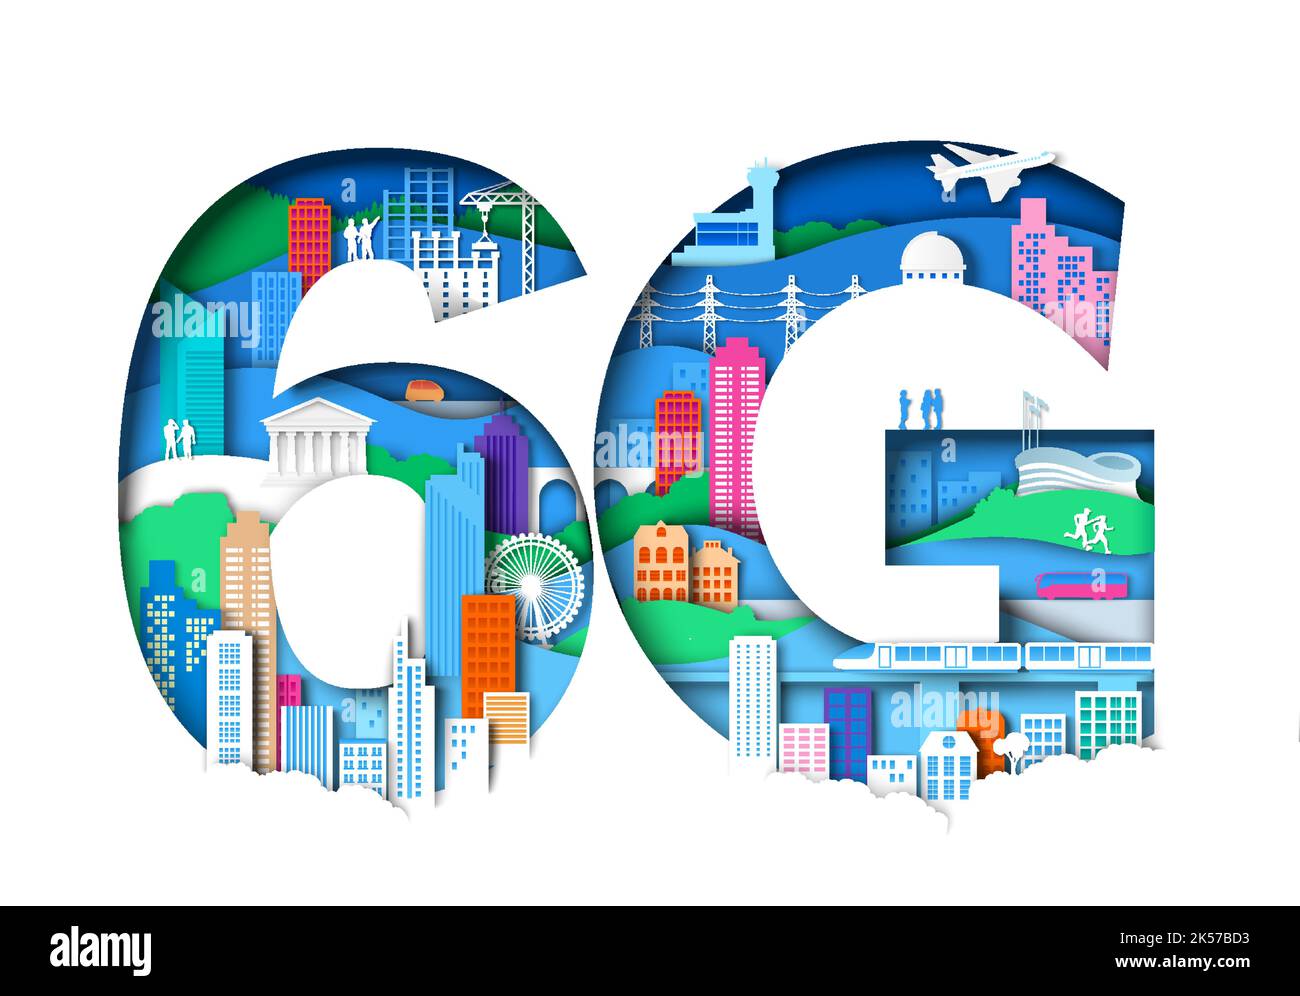 Network 6g technology high speed connection vector Stock Vector